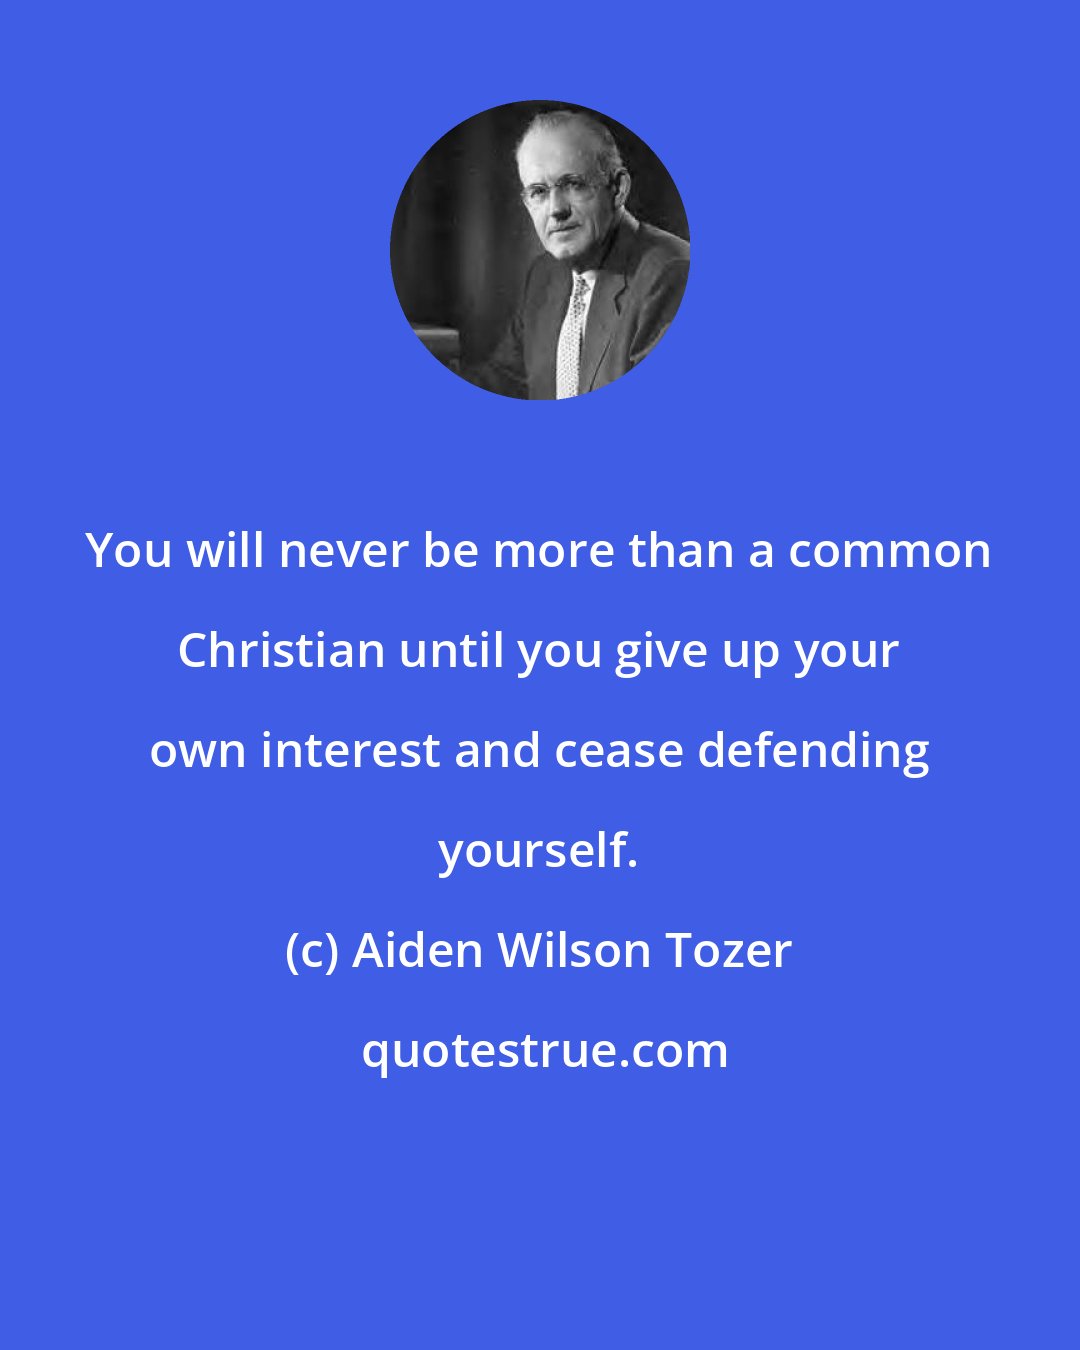 Aiden Wilson Tozer: You will never be more than a common Christian until you give up your own interest and cease defending yourself.